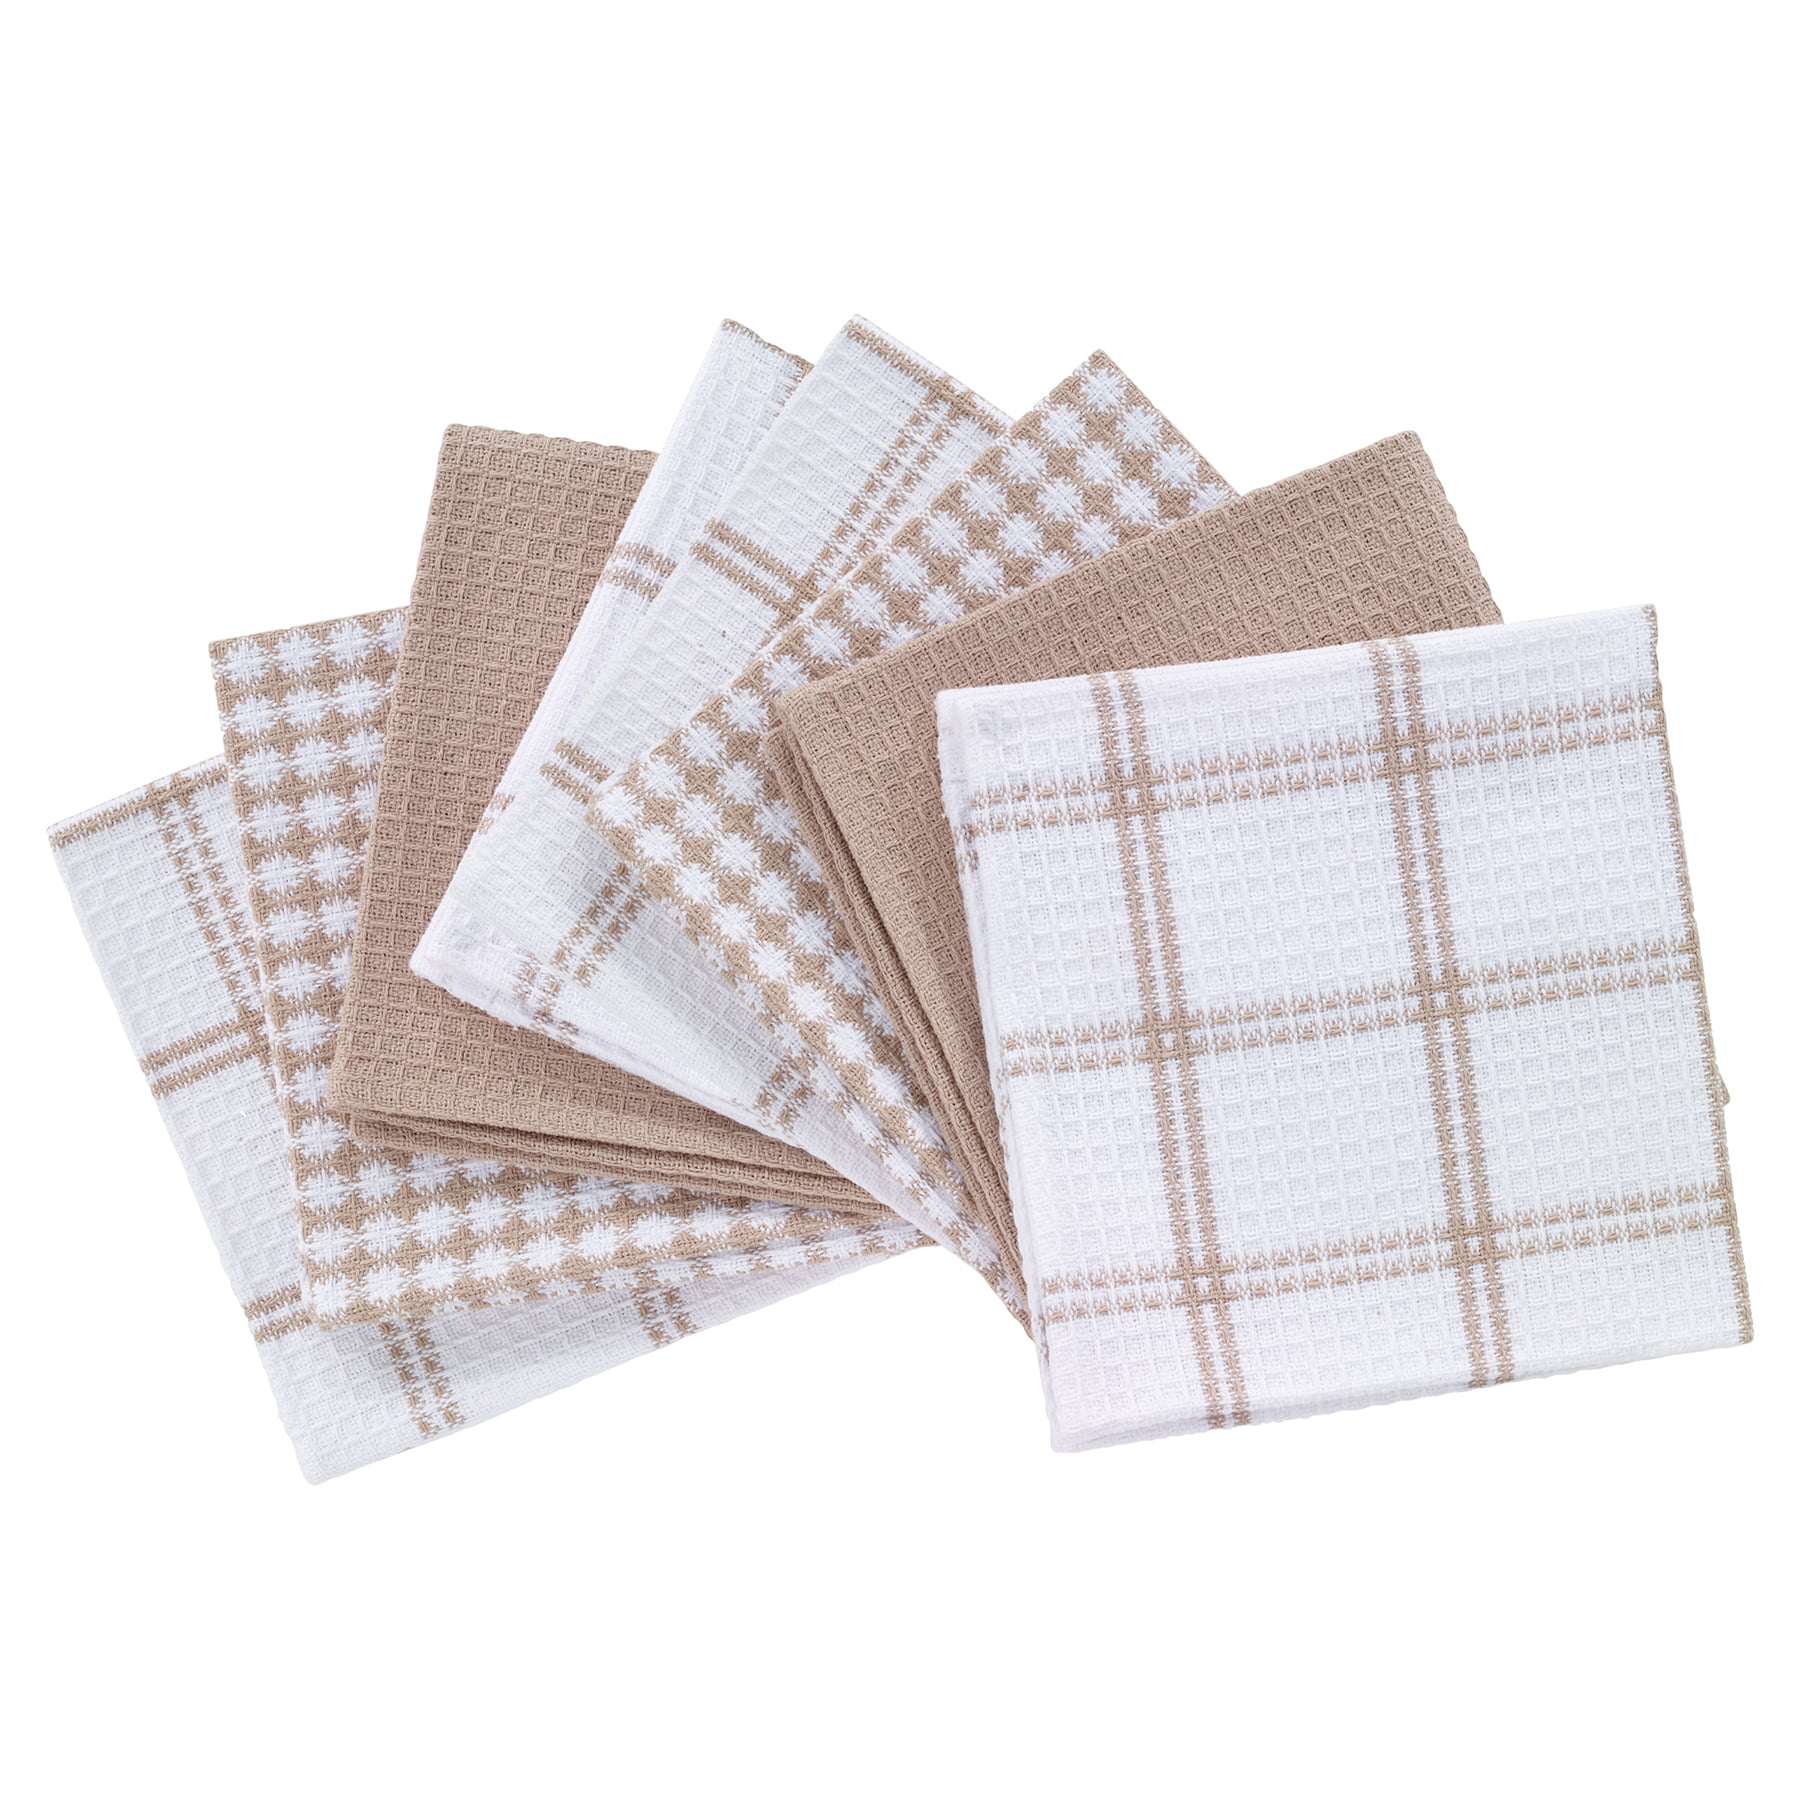  100% Cotton Flat Waffle Dish Cloths for Washing Dishes,  12x13, 4-Pack, Neutral T-fal Textiles: Home & Kitchen